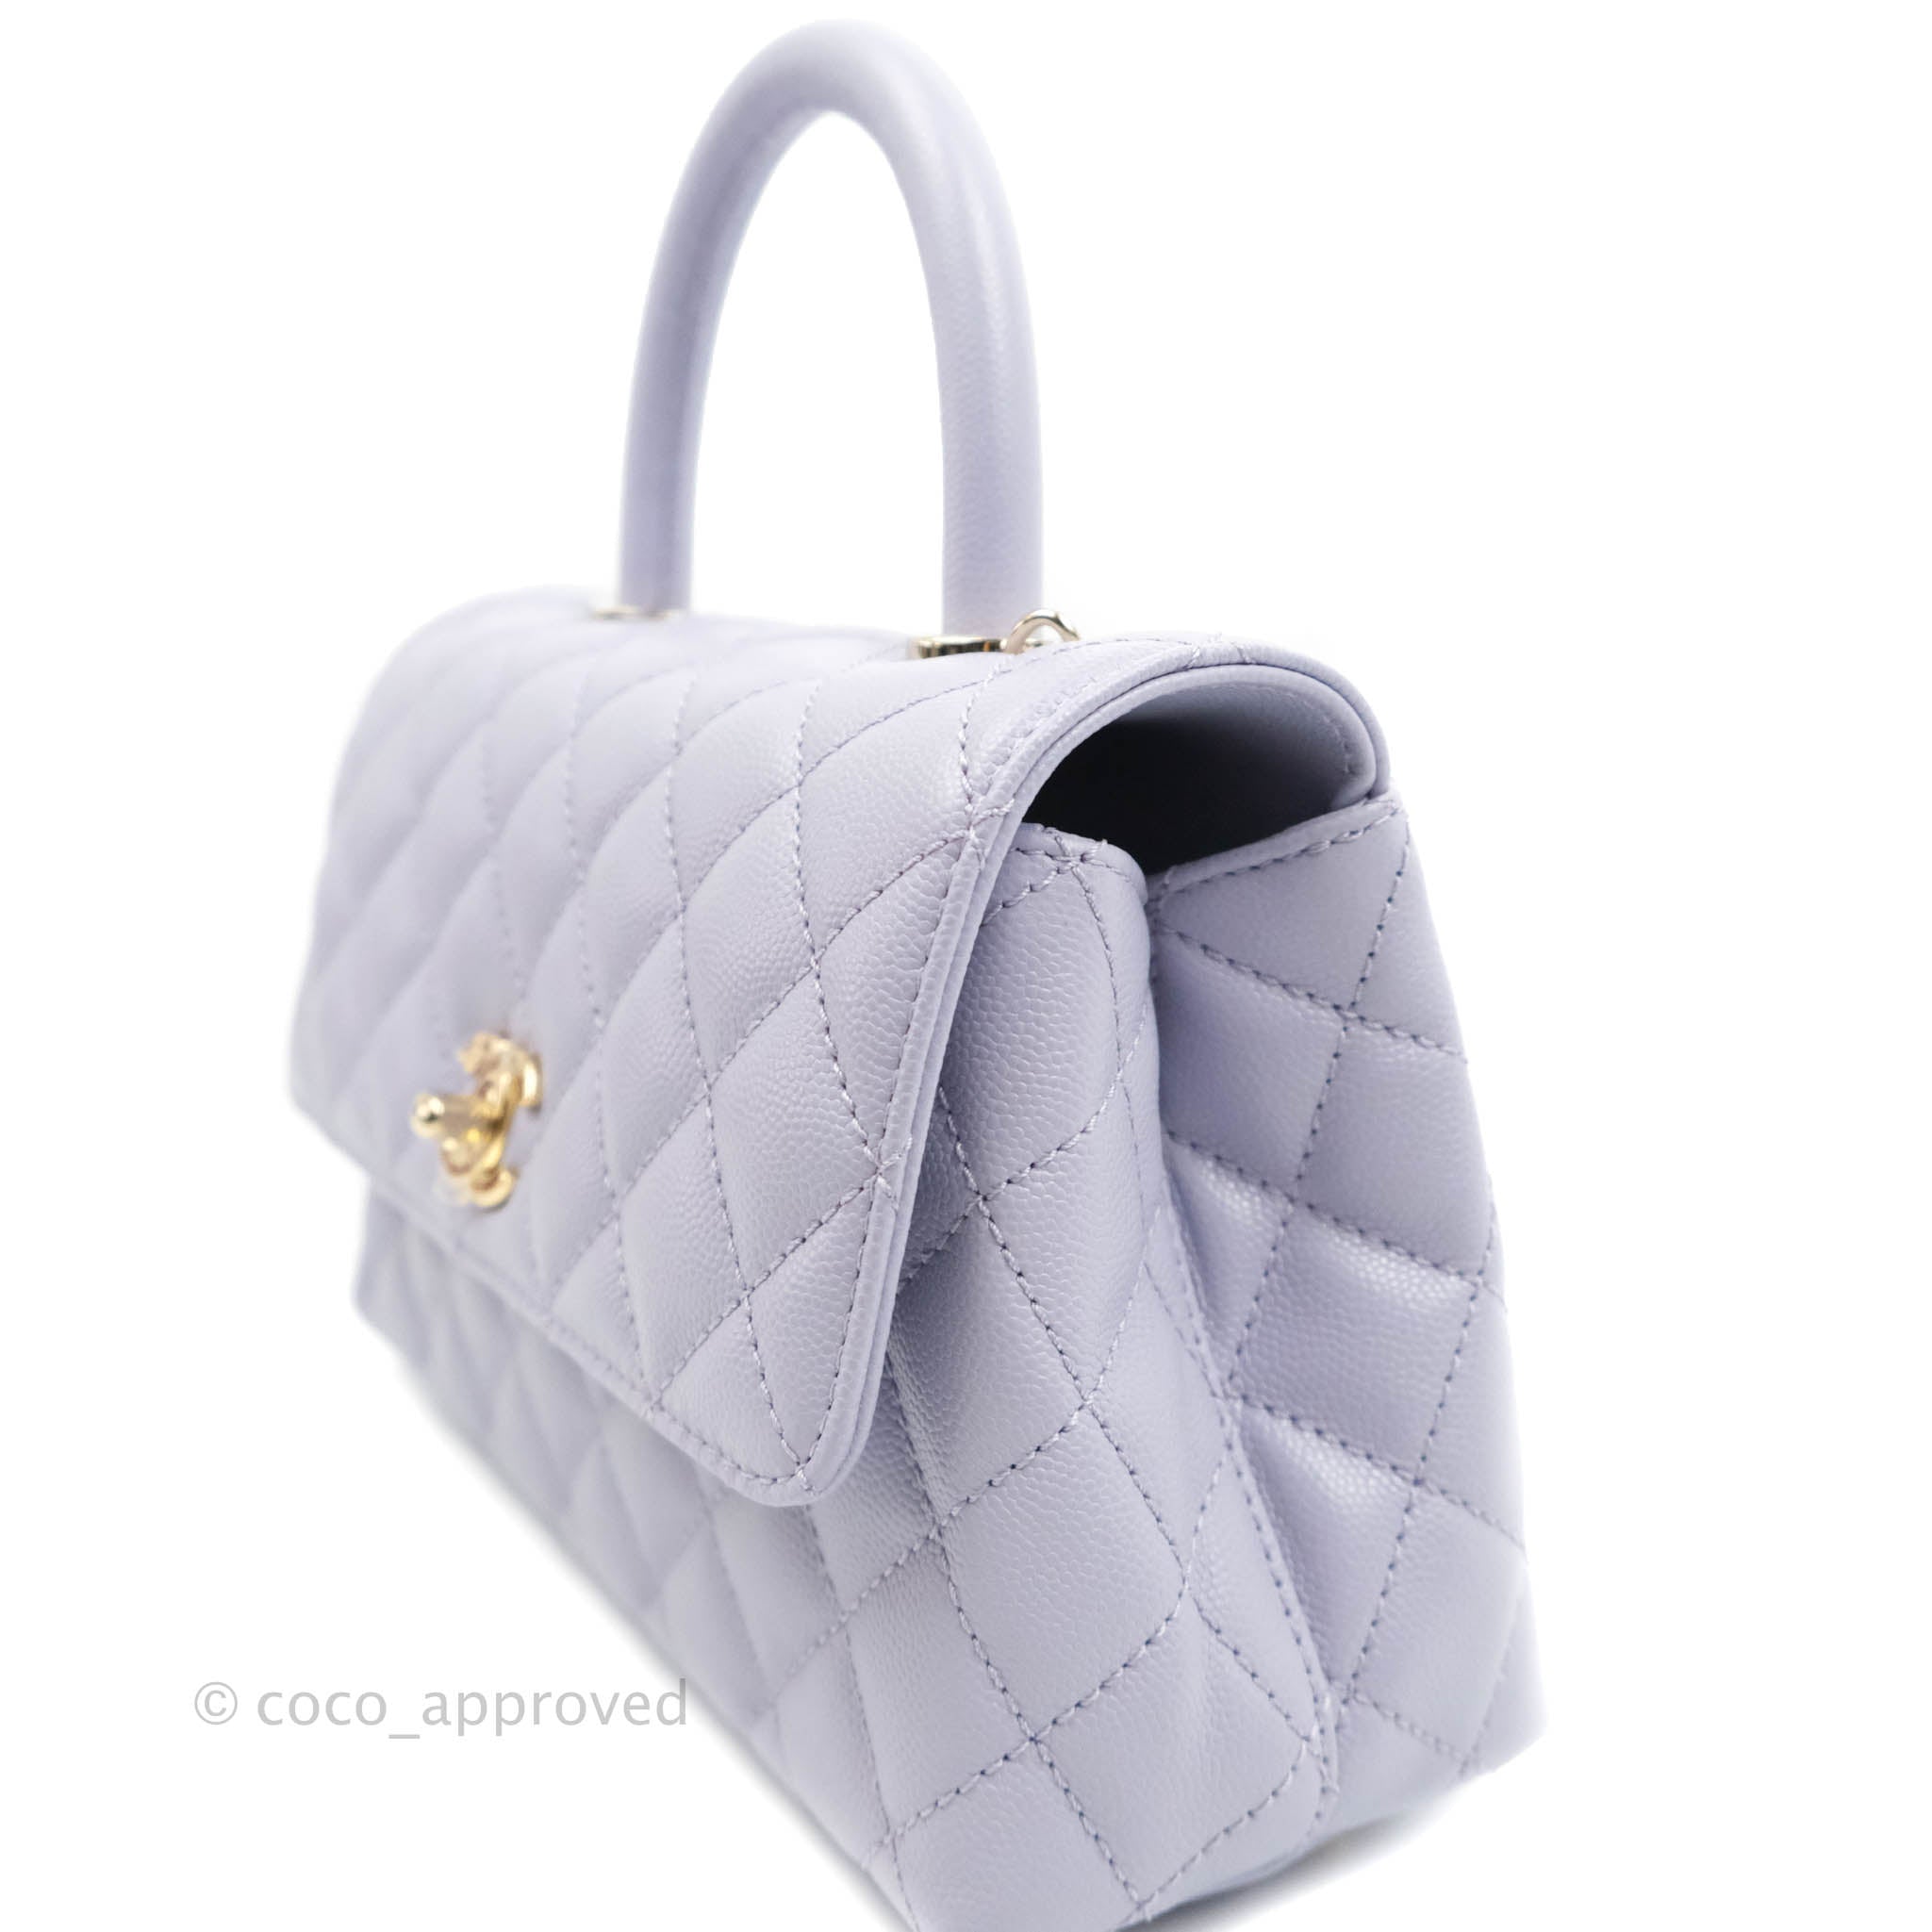 TIMELESS V0GUE PTY LTD on Instagram: “CHANEL COCO HANDLE Price: $5190 USD /  $7250 AUD Year: 2020 (20A) Color: Lilac Size…